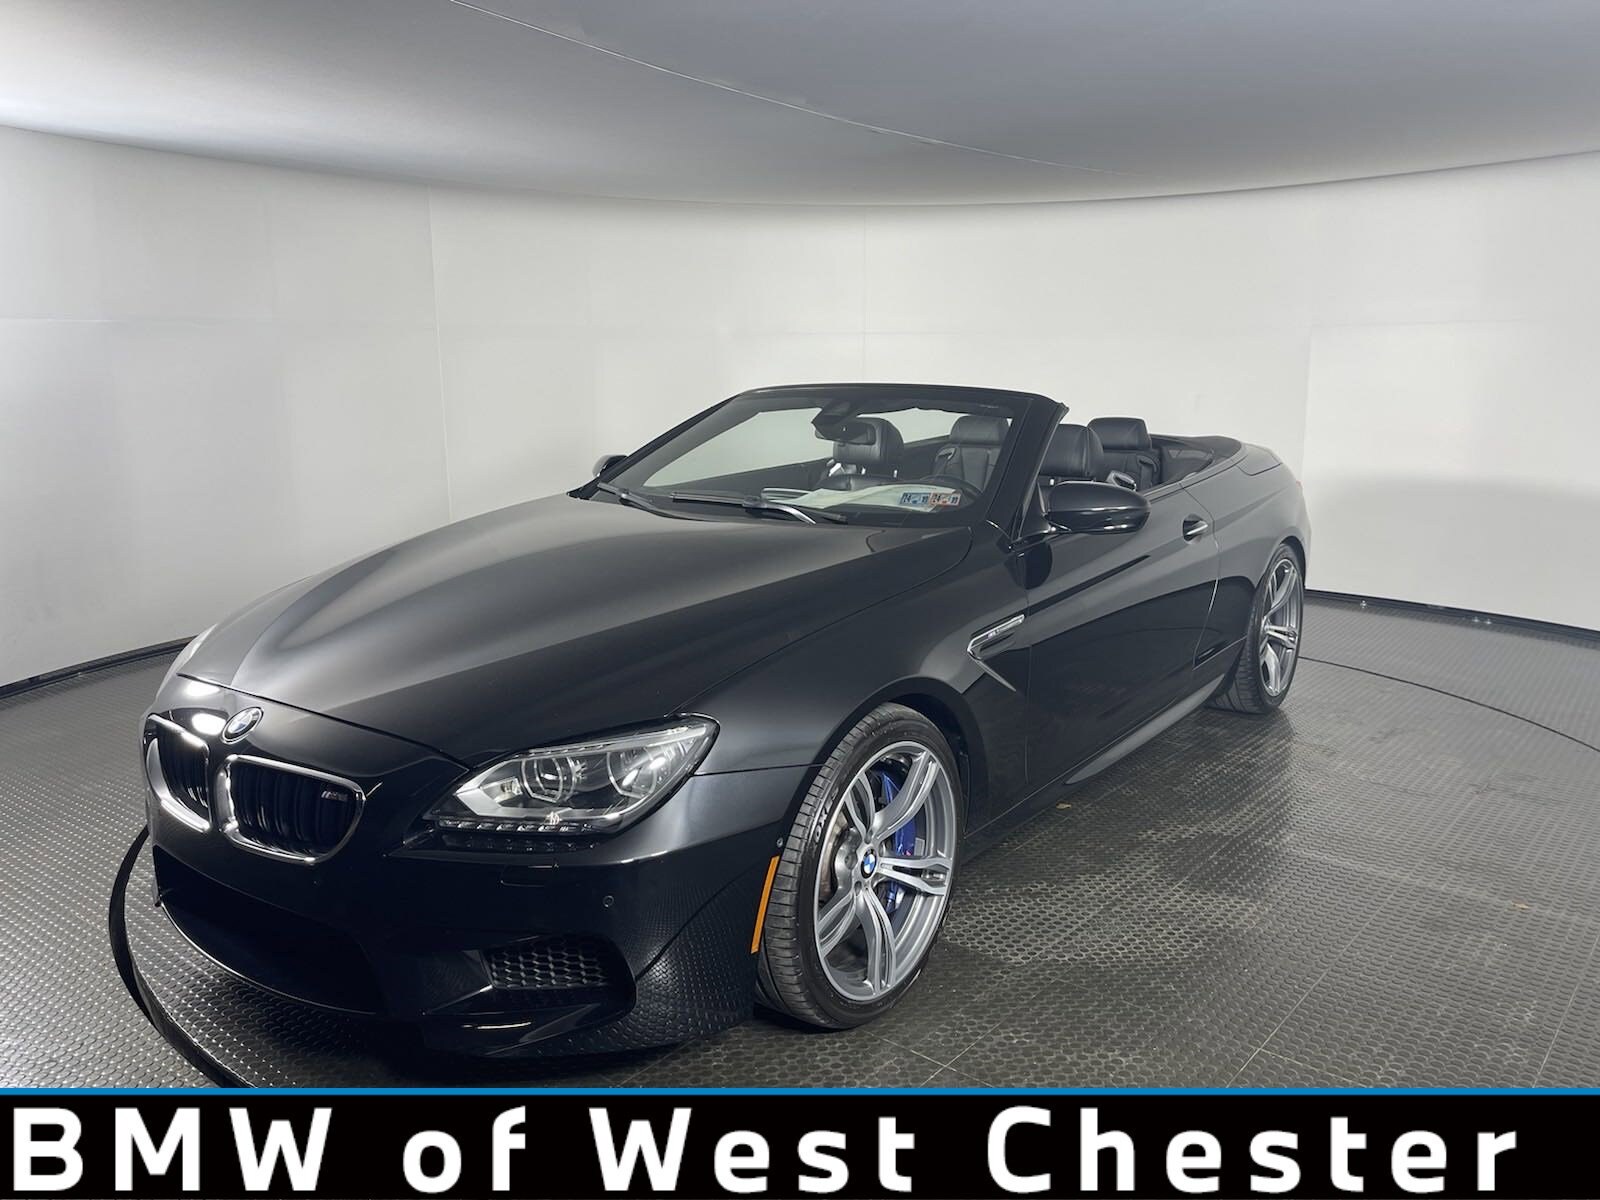 Used 2013 BMW M6 For Sale in Limerick,PA near Pottstown, PA